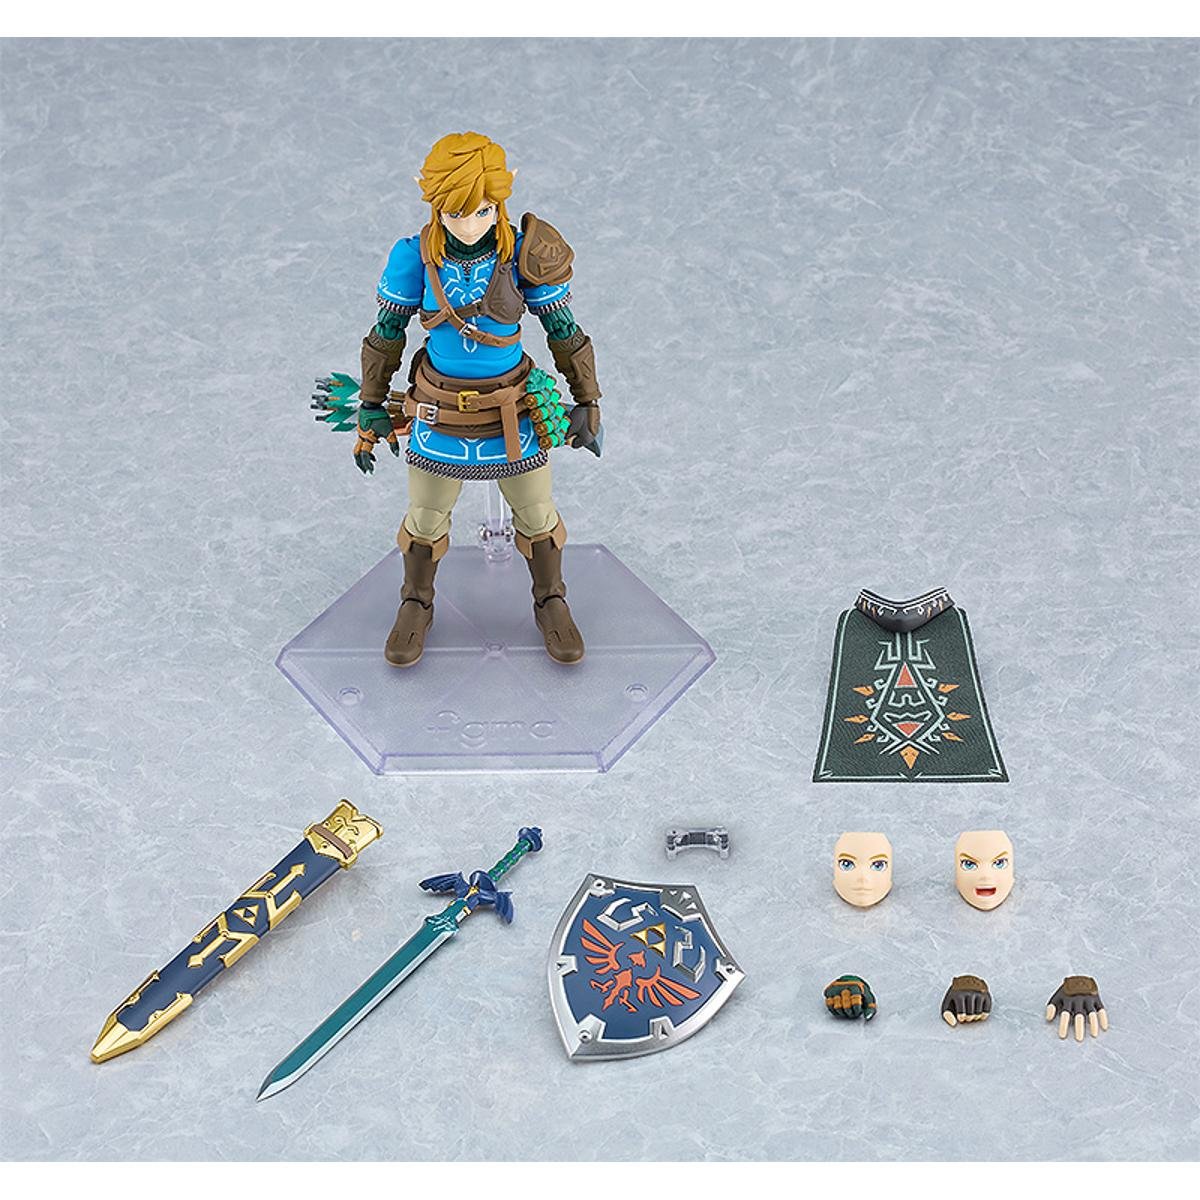 ⚠️🏹💥ALERT💥🏹⚠️
#Statoversians!
👁🌛👁
     🫶
Max Factory The Legend of Zelda: Tears of the Kingdom figma Link is AGAIN up for preorder on Amazon for ONLY ($69.99)!
:
#zelda #thelegendofzelda #link #tearsofthekingdom #nintendo #figma #goodsmilecompany #gsc #maxfactory